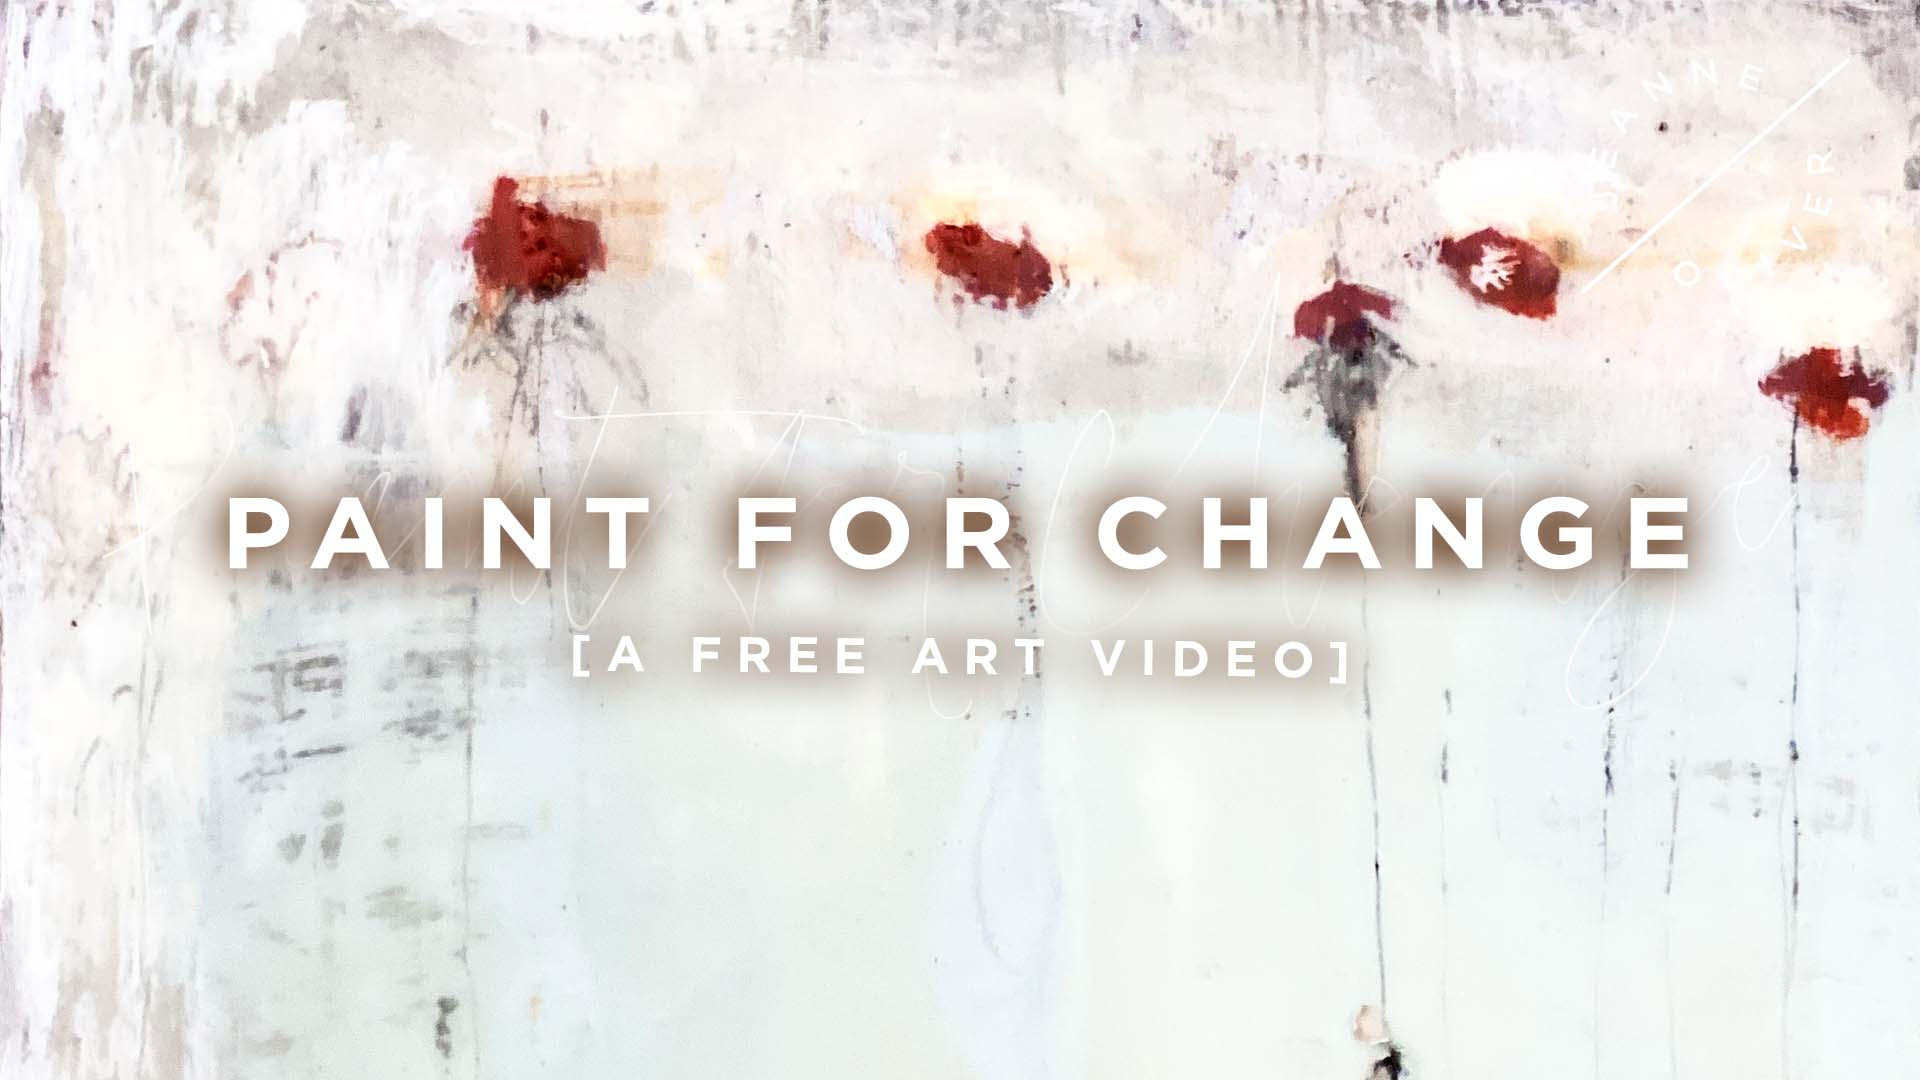 Free Art Video: Paint for Change